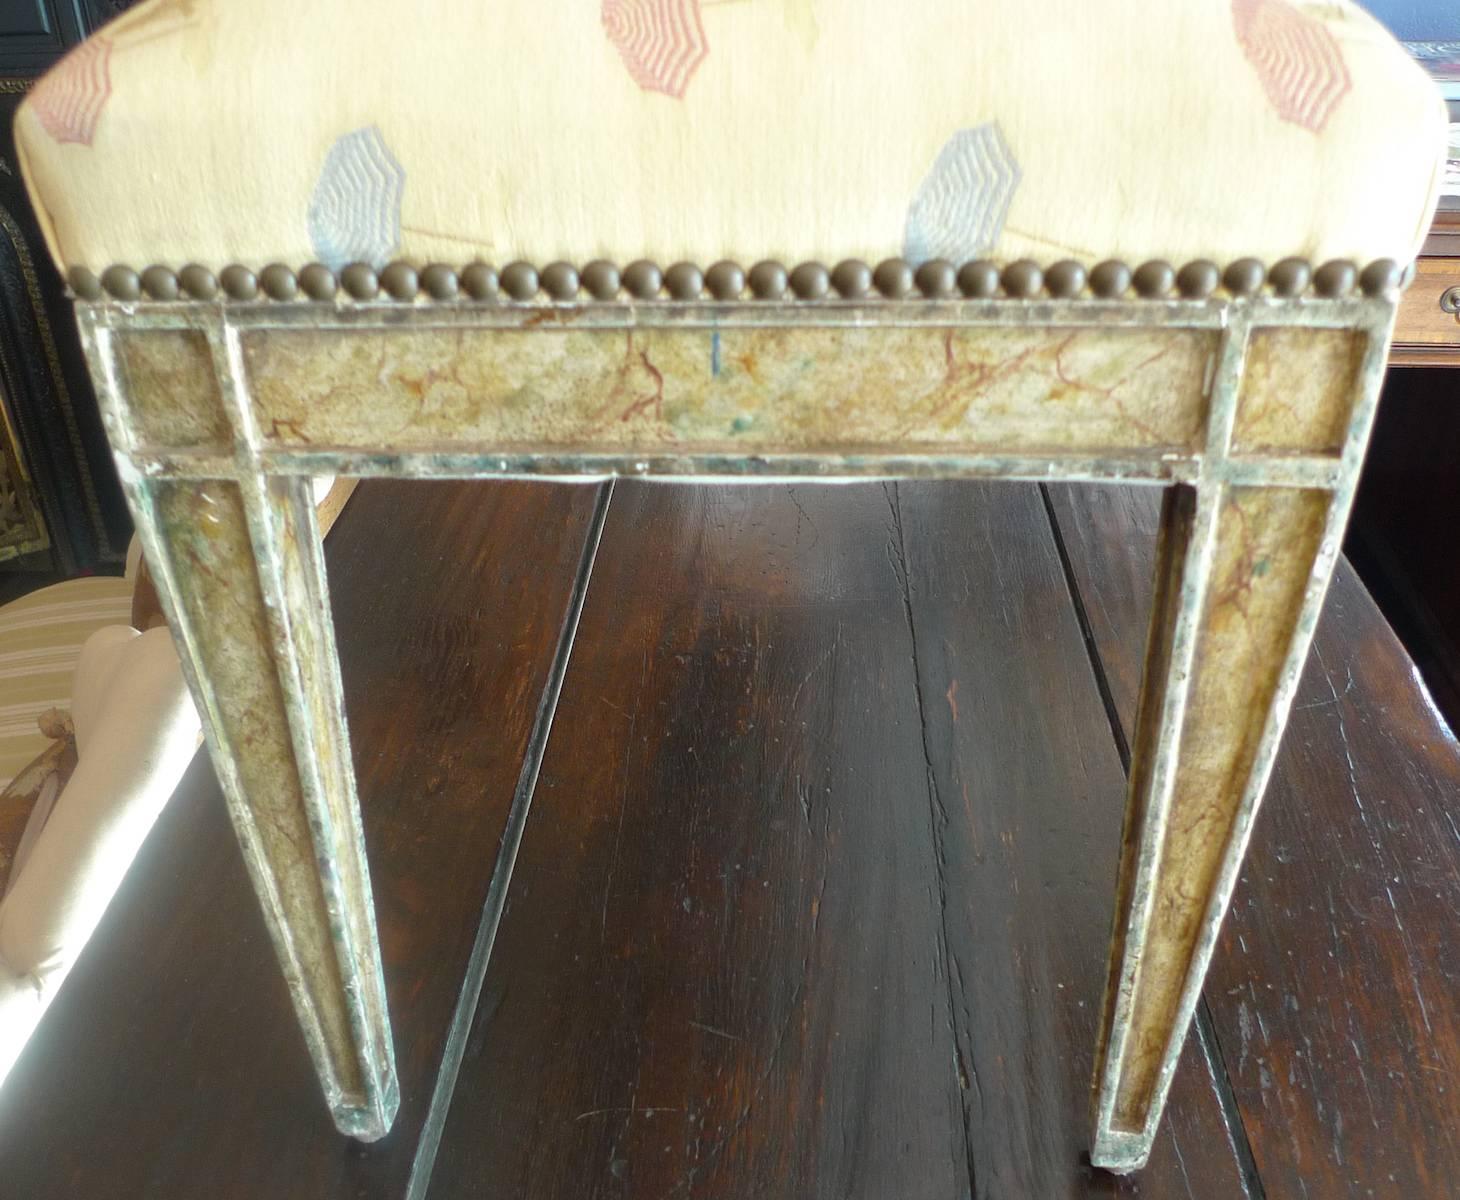 Spanish Pierre Lottier 1960s bench with faux marble legs and supports, Reupholstered with new colored fabric.